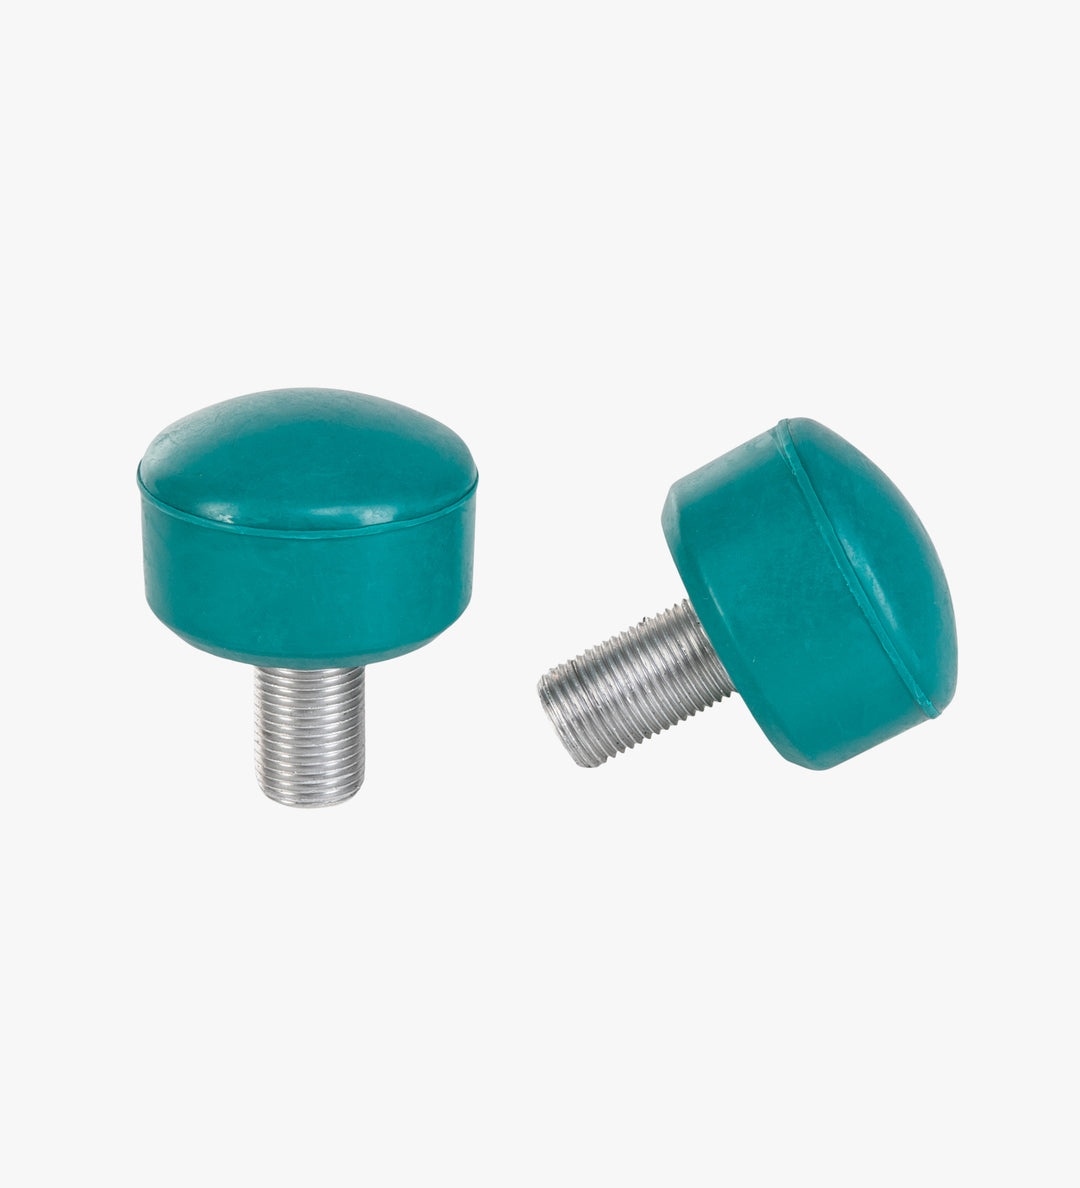 Dark Green Adjustable C7 roller skate stoppers as seen on Enchanted Forest, made from durable rubber and measure 47 by 35 mm. 